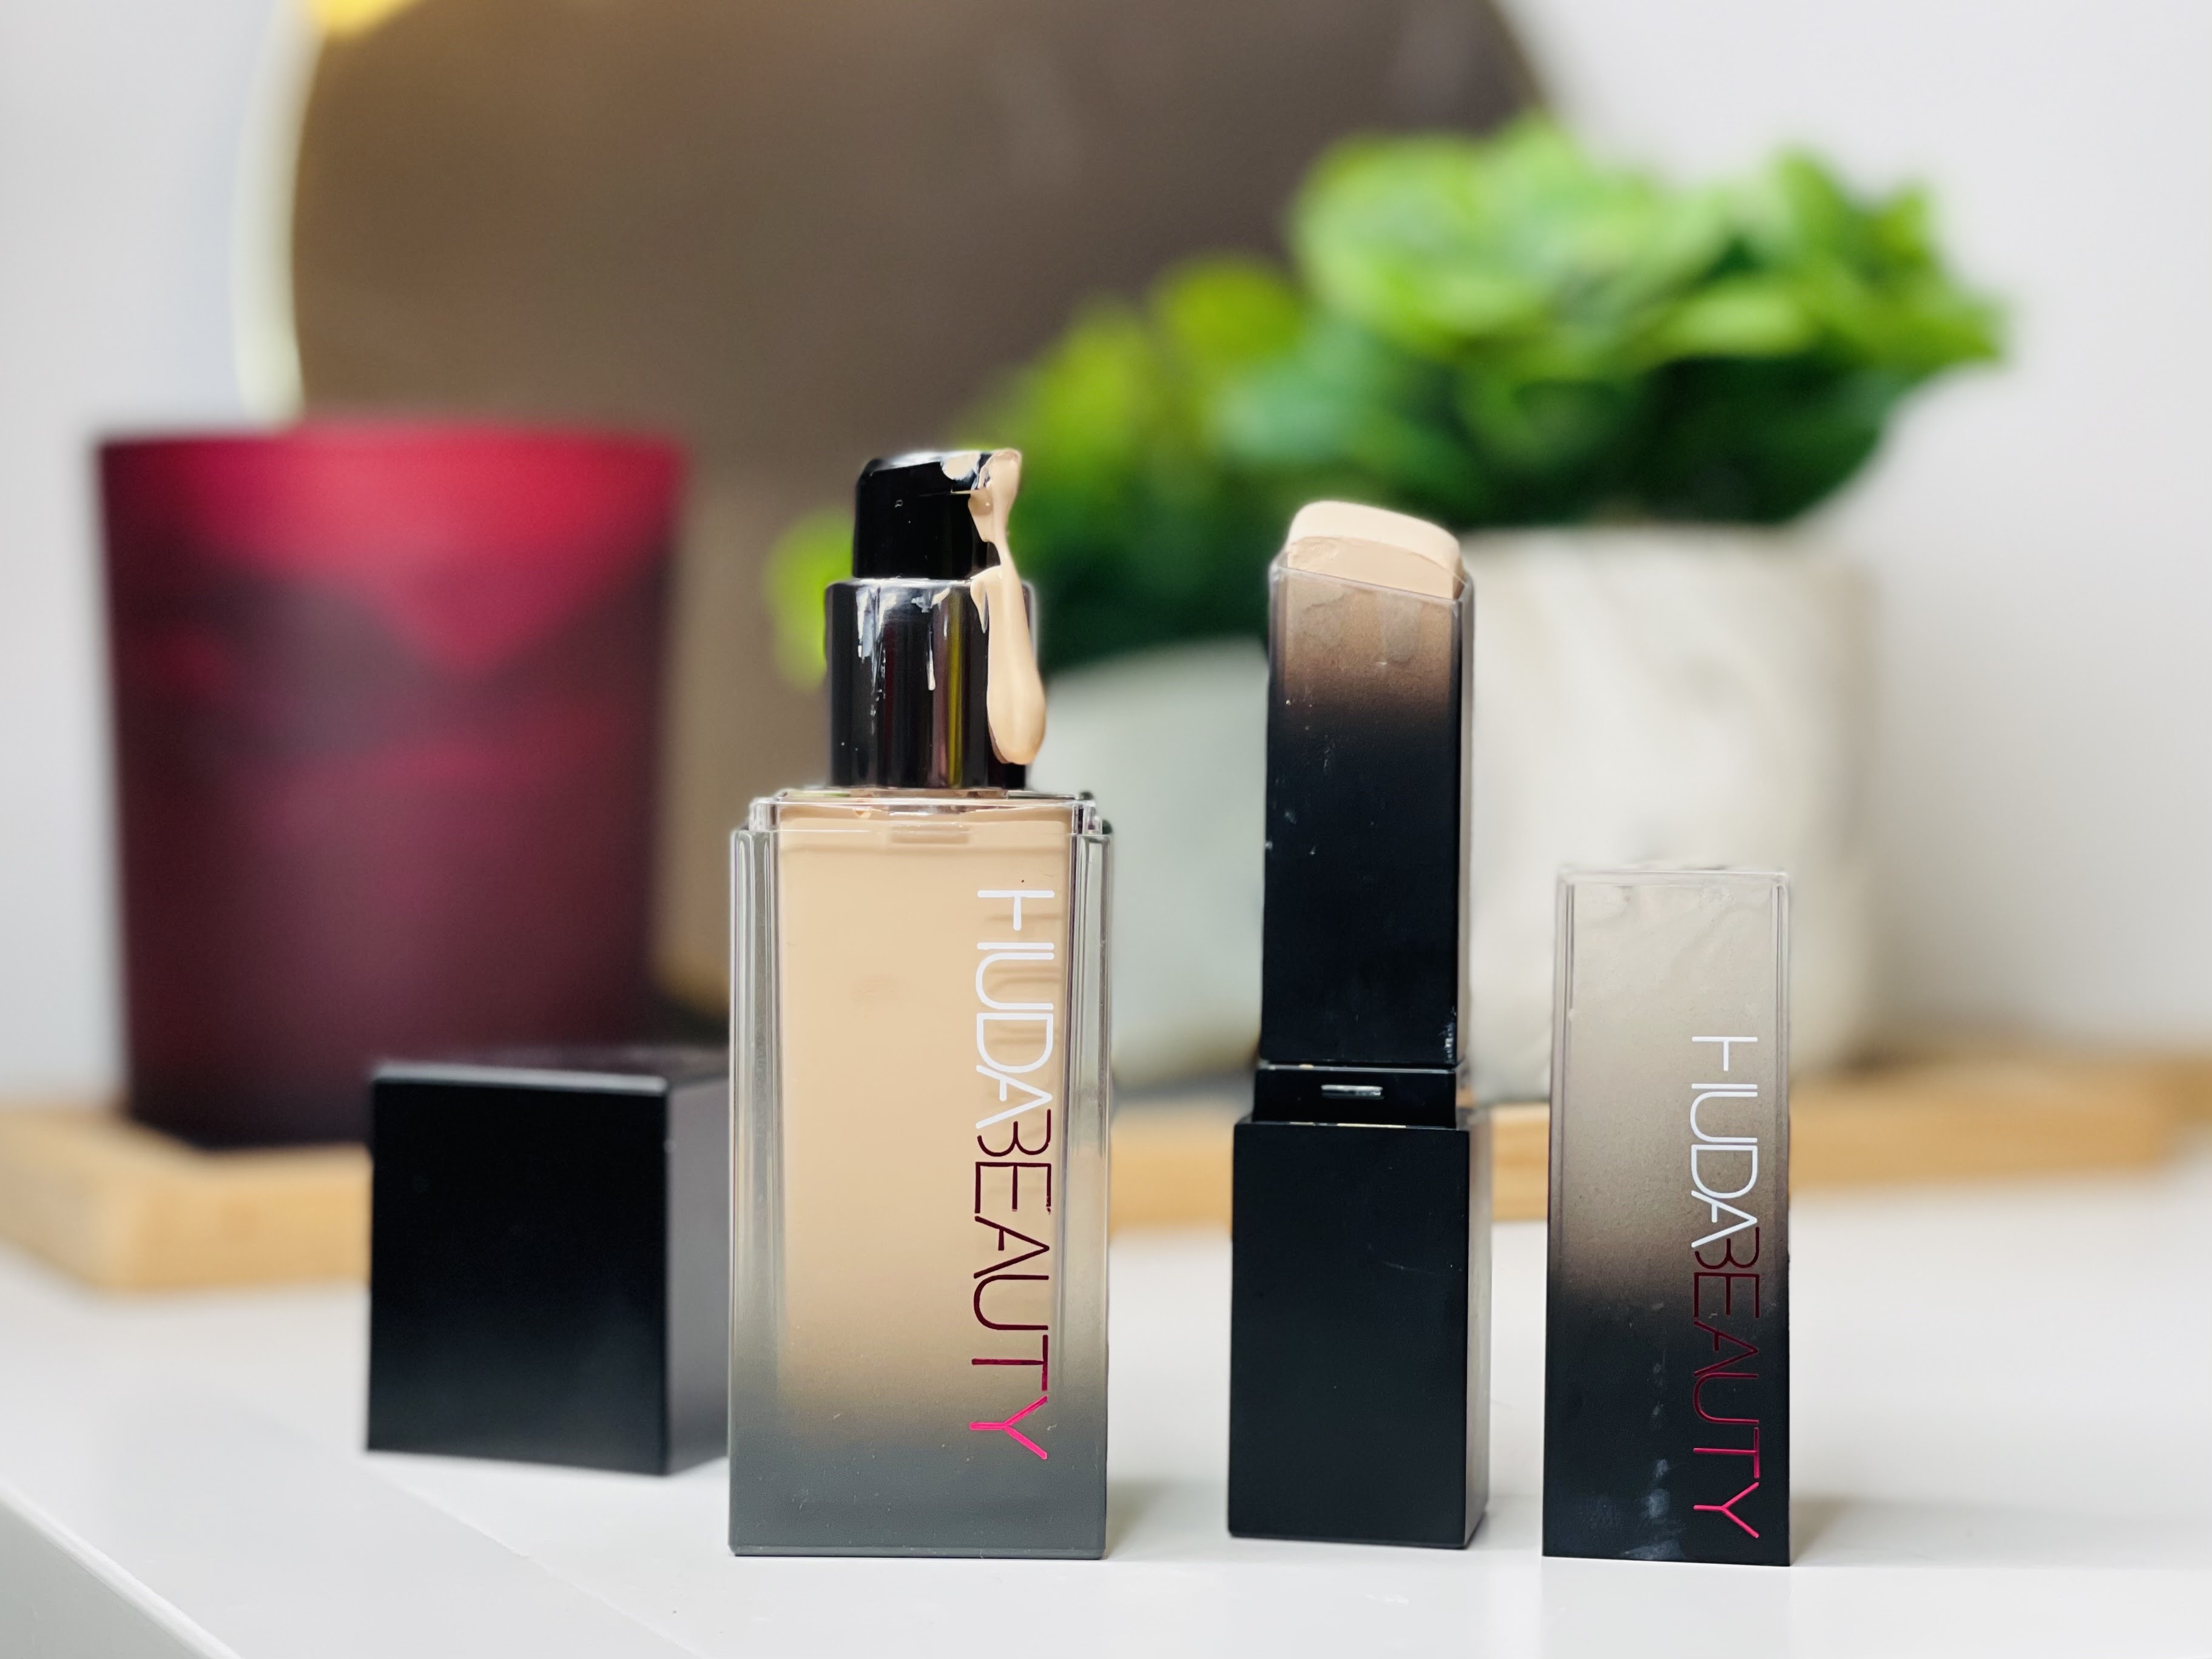 Which Huda Beauty #FauxFilter foundation should you buy?